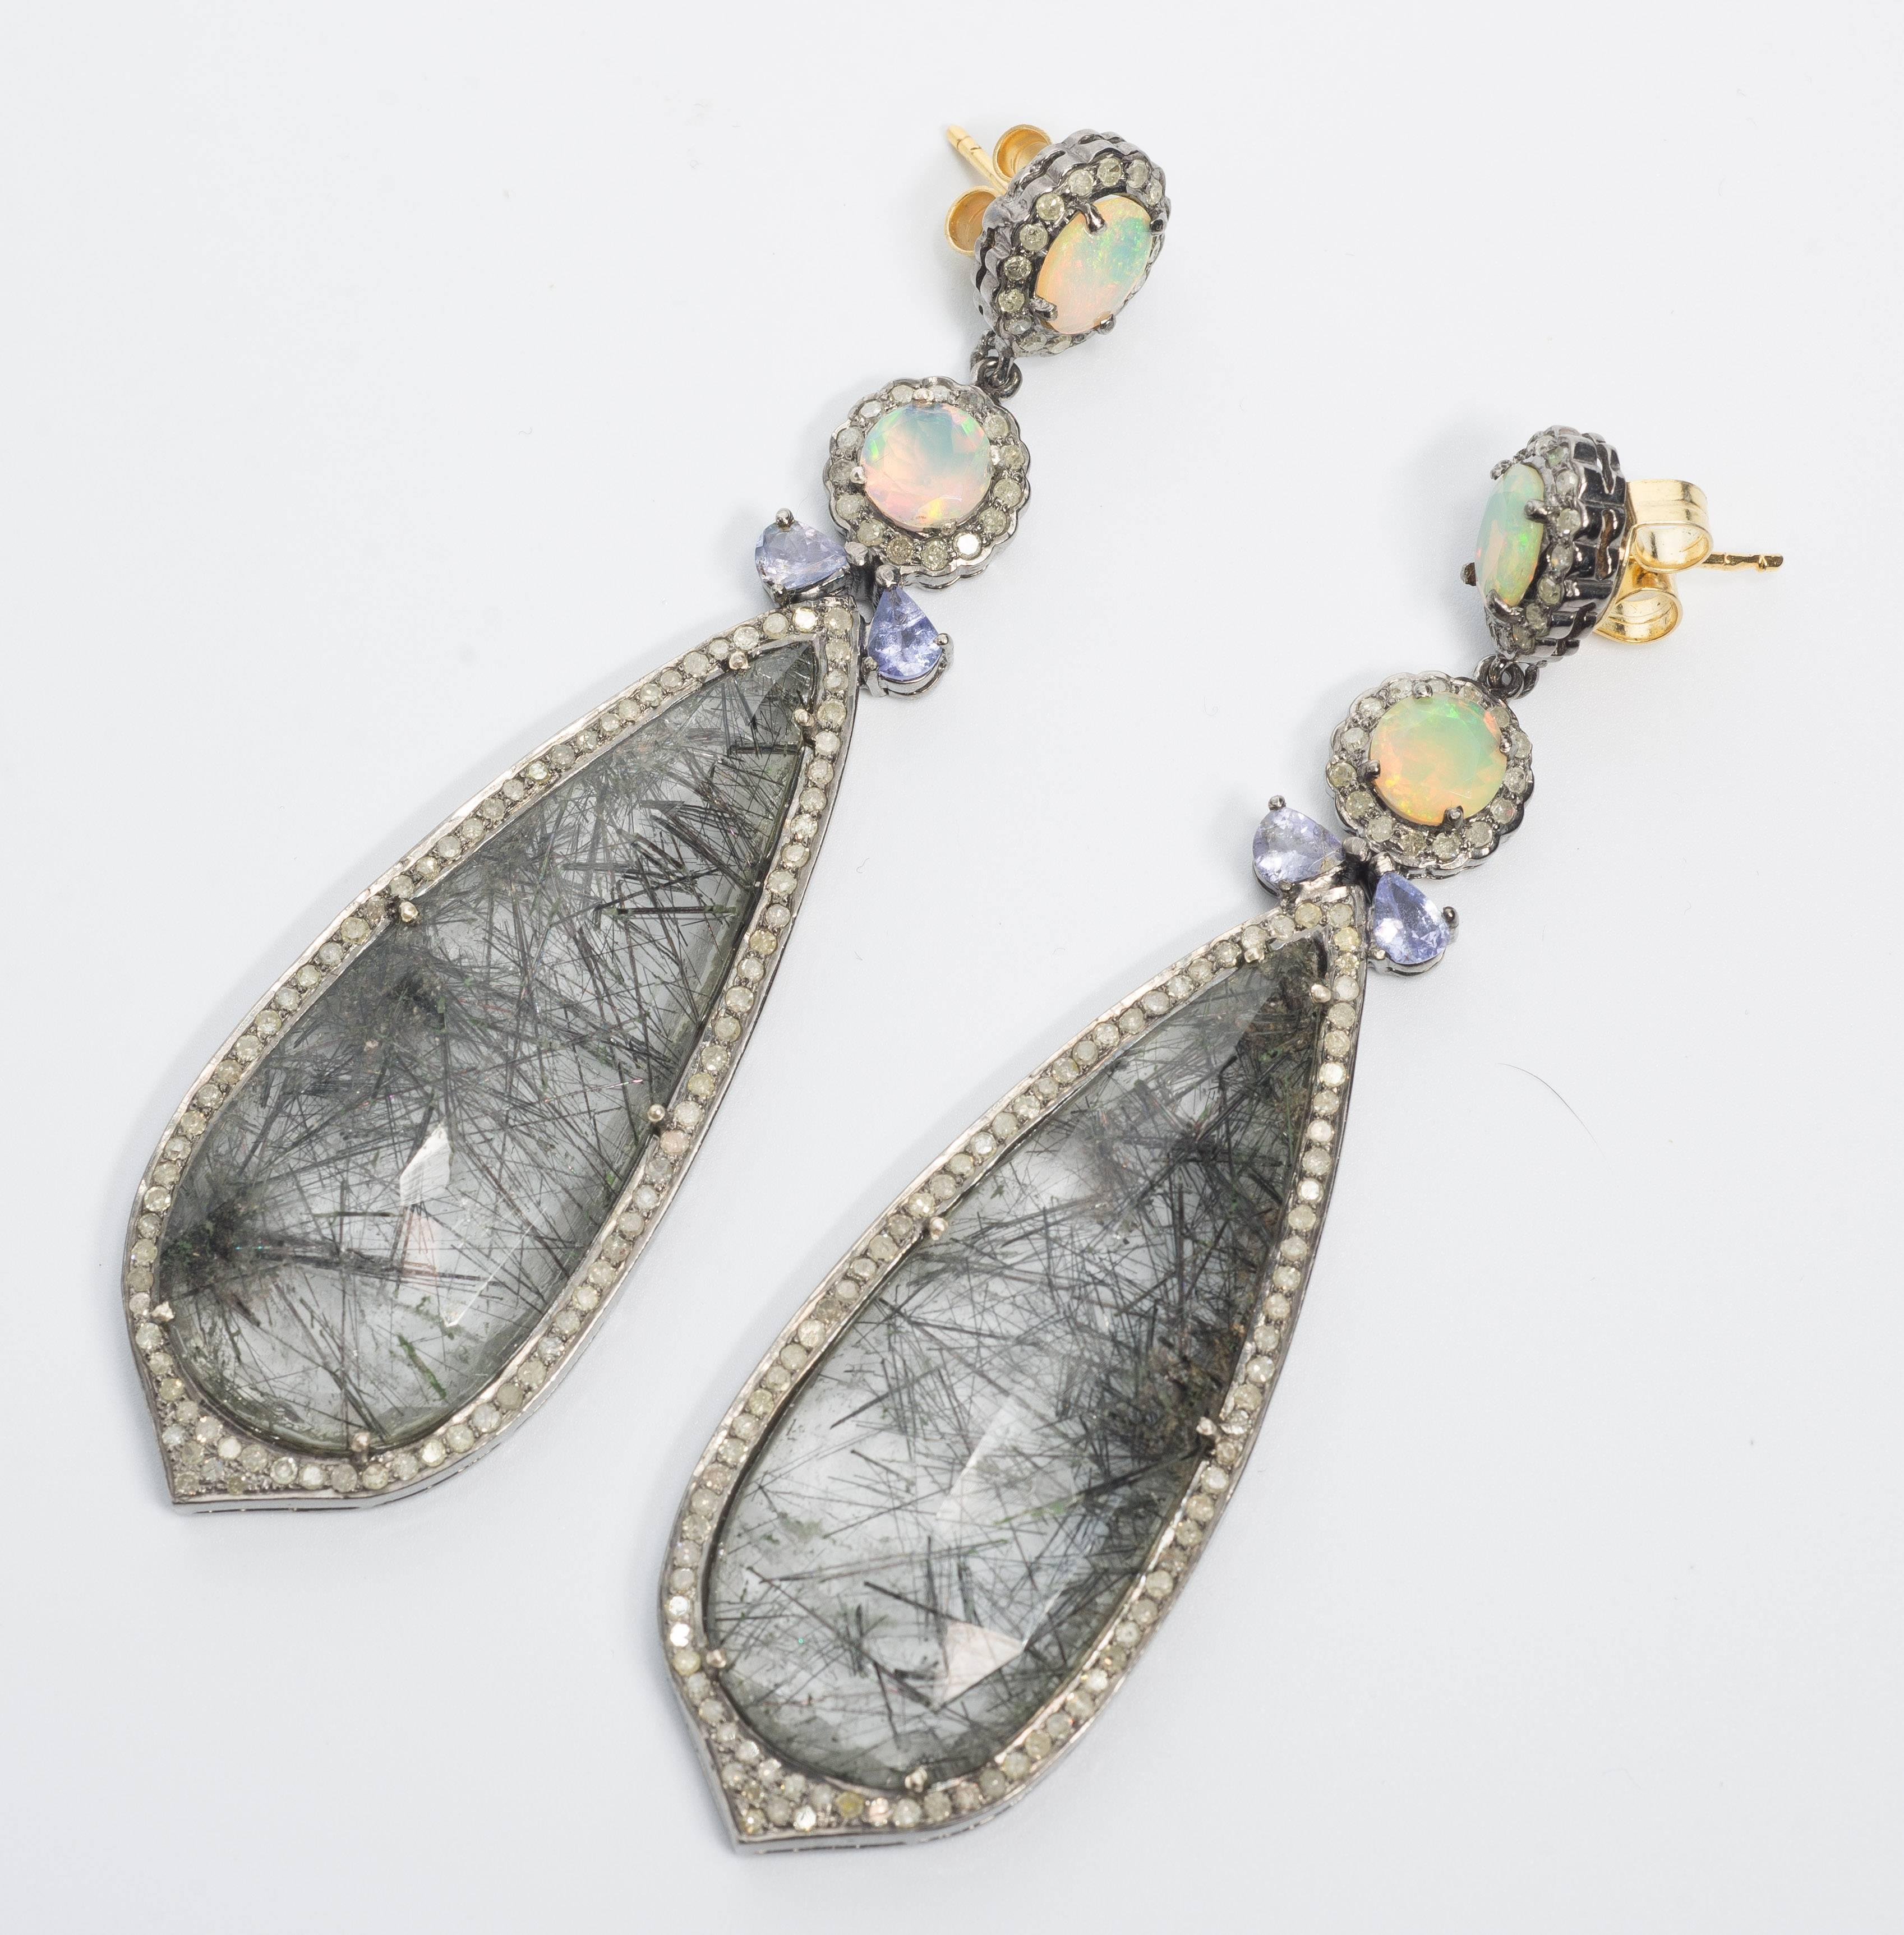 Stunning Fine Quality Diamond Opal Rutilated Needle Quartz Long Earrings measuring 3.5 inches long by 1 inch wide.
The rutilated quartz has strong black needles, is thick with complete faceted tops delicately set with antique cut diamonds and topped